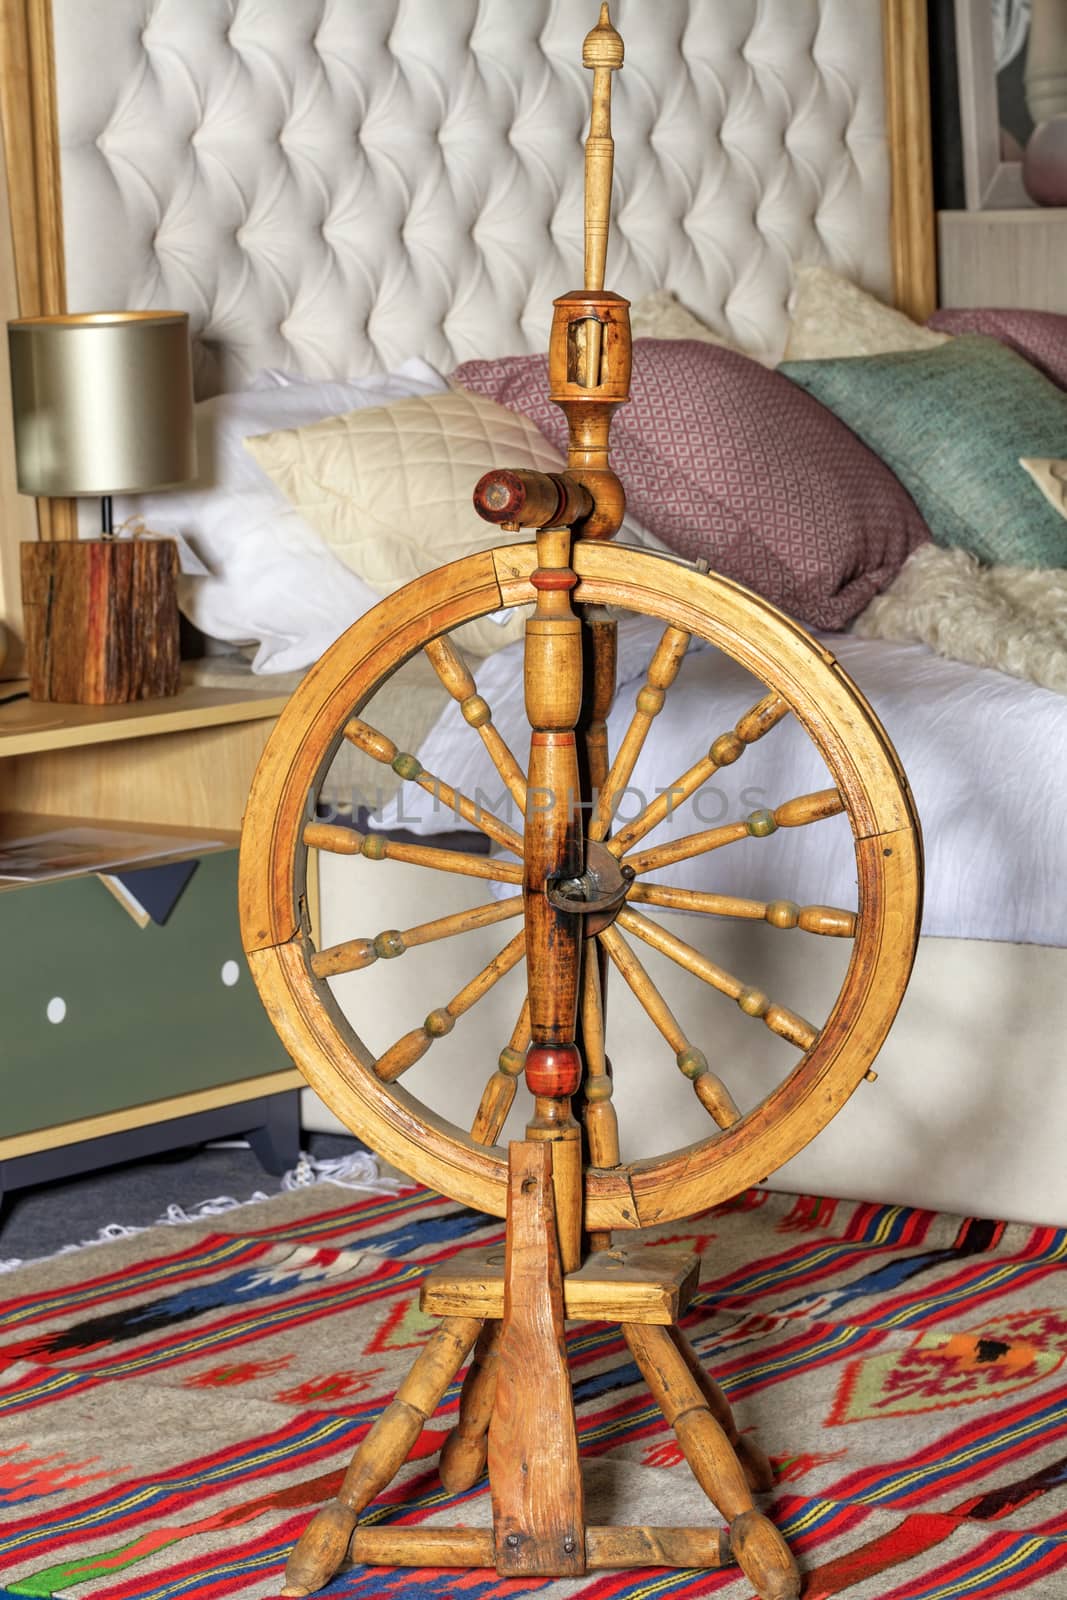 An old-fashioned spinning wheel stands on a homespun carpet at the head of the bed in the bedroom as part of an old rustic decor.